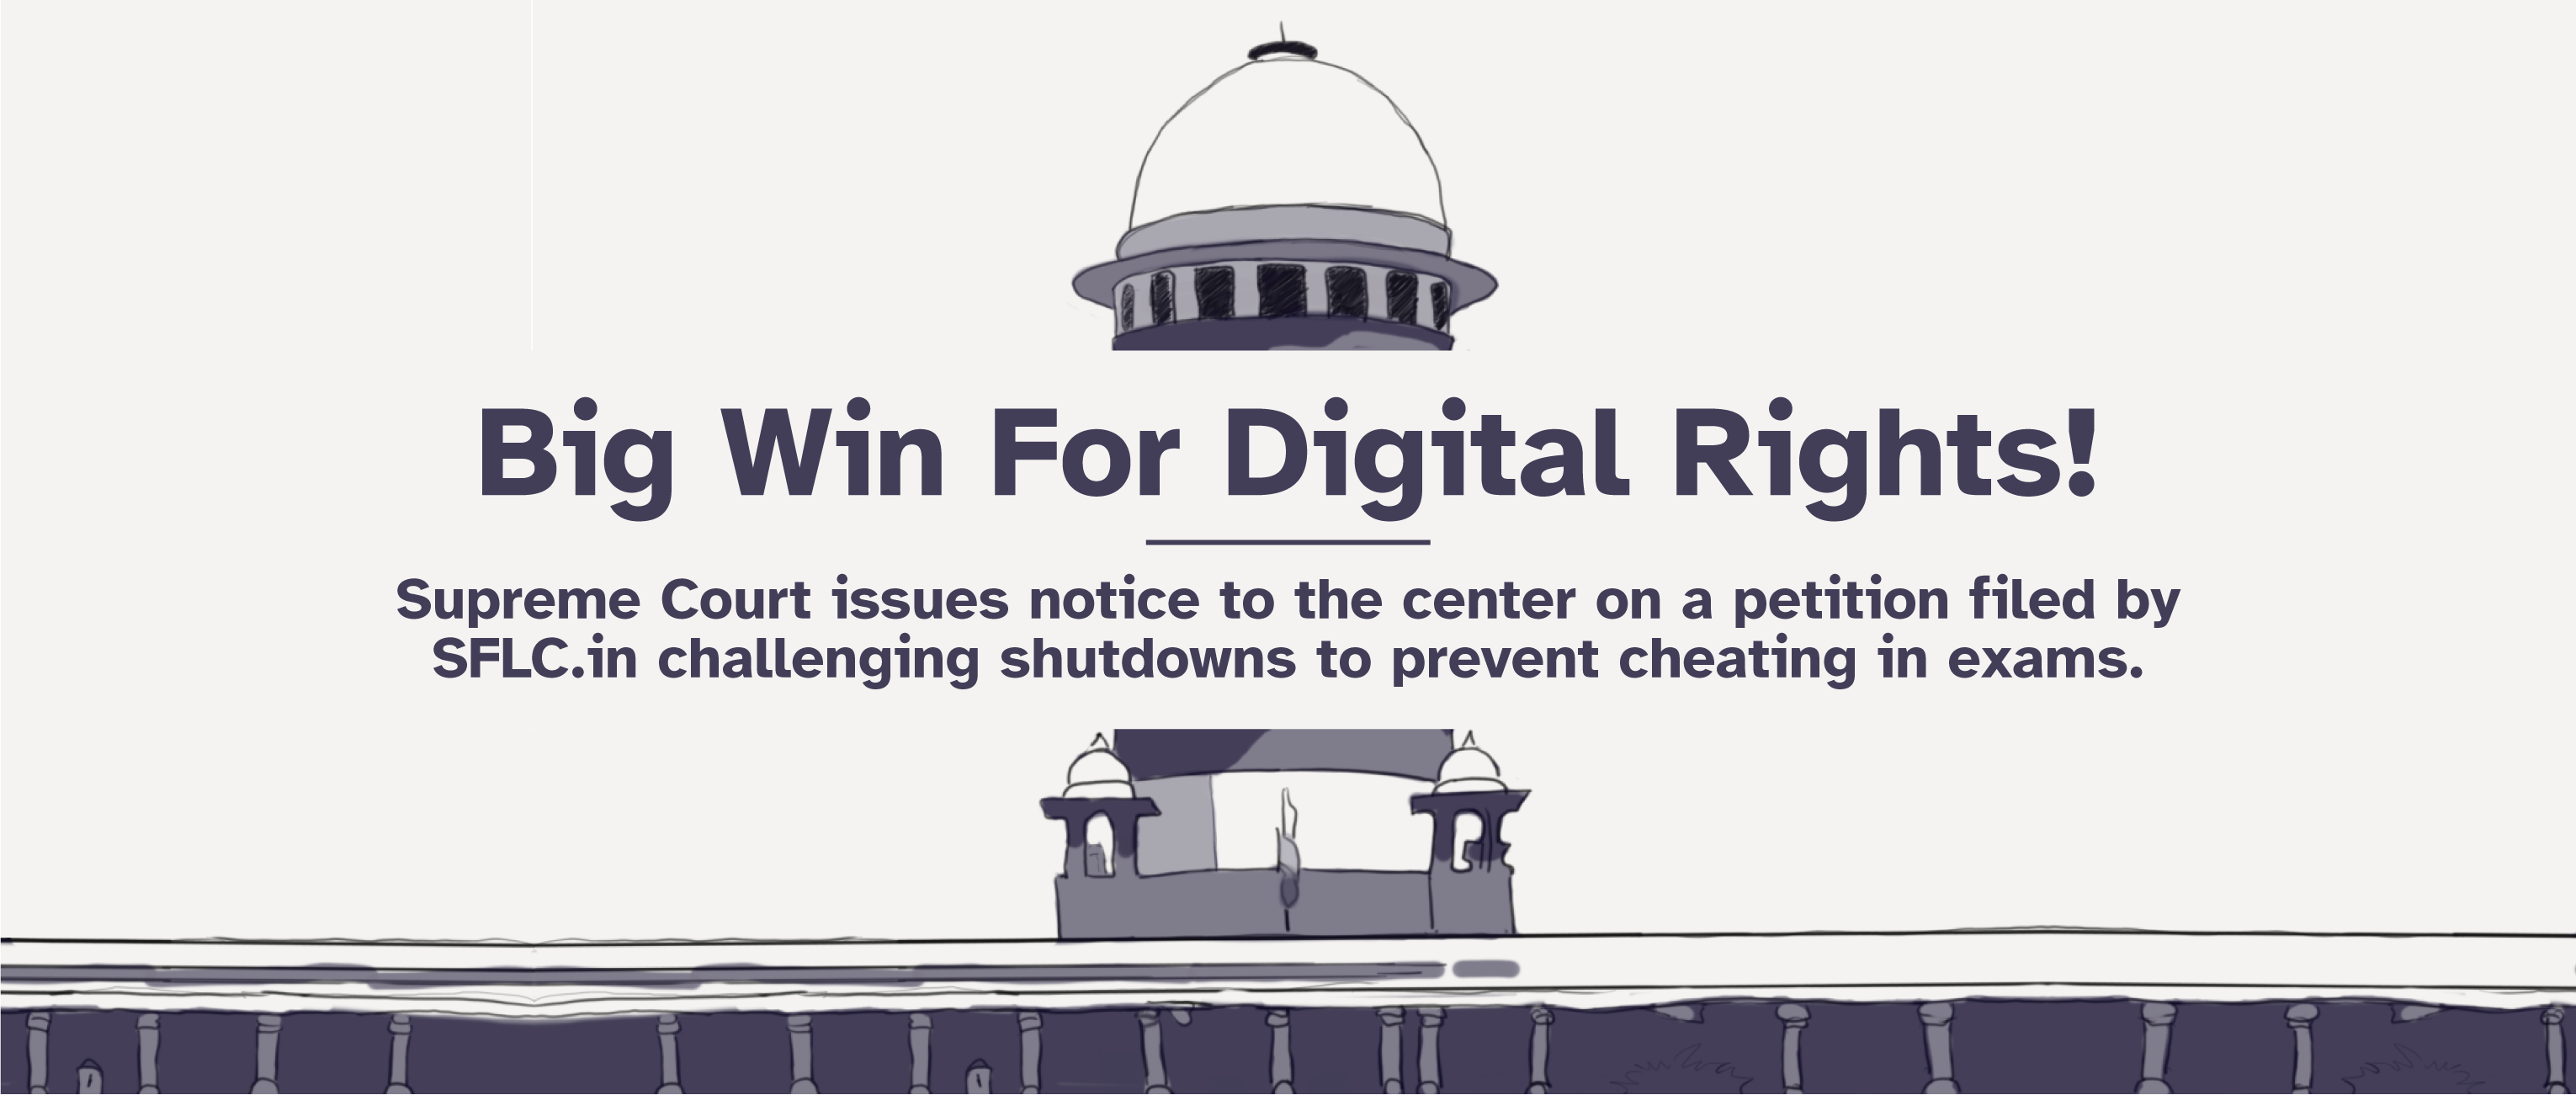 SFLC.IN’S WRIT PETITION CHALLENGING ARBITRARY INTERNET SHUTDOWNS DURING EXAMINATIONS IN THE SUPREME COURT OF INDIA